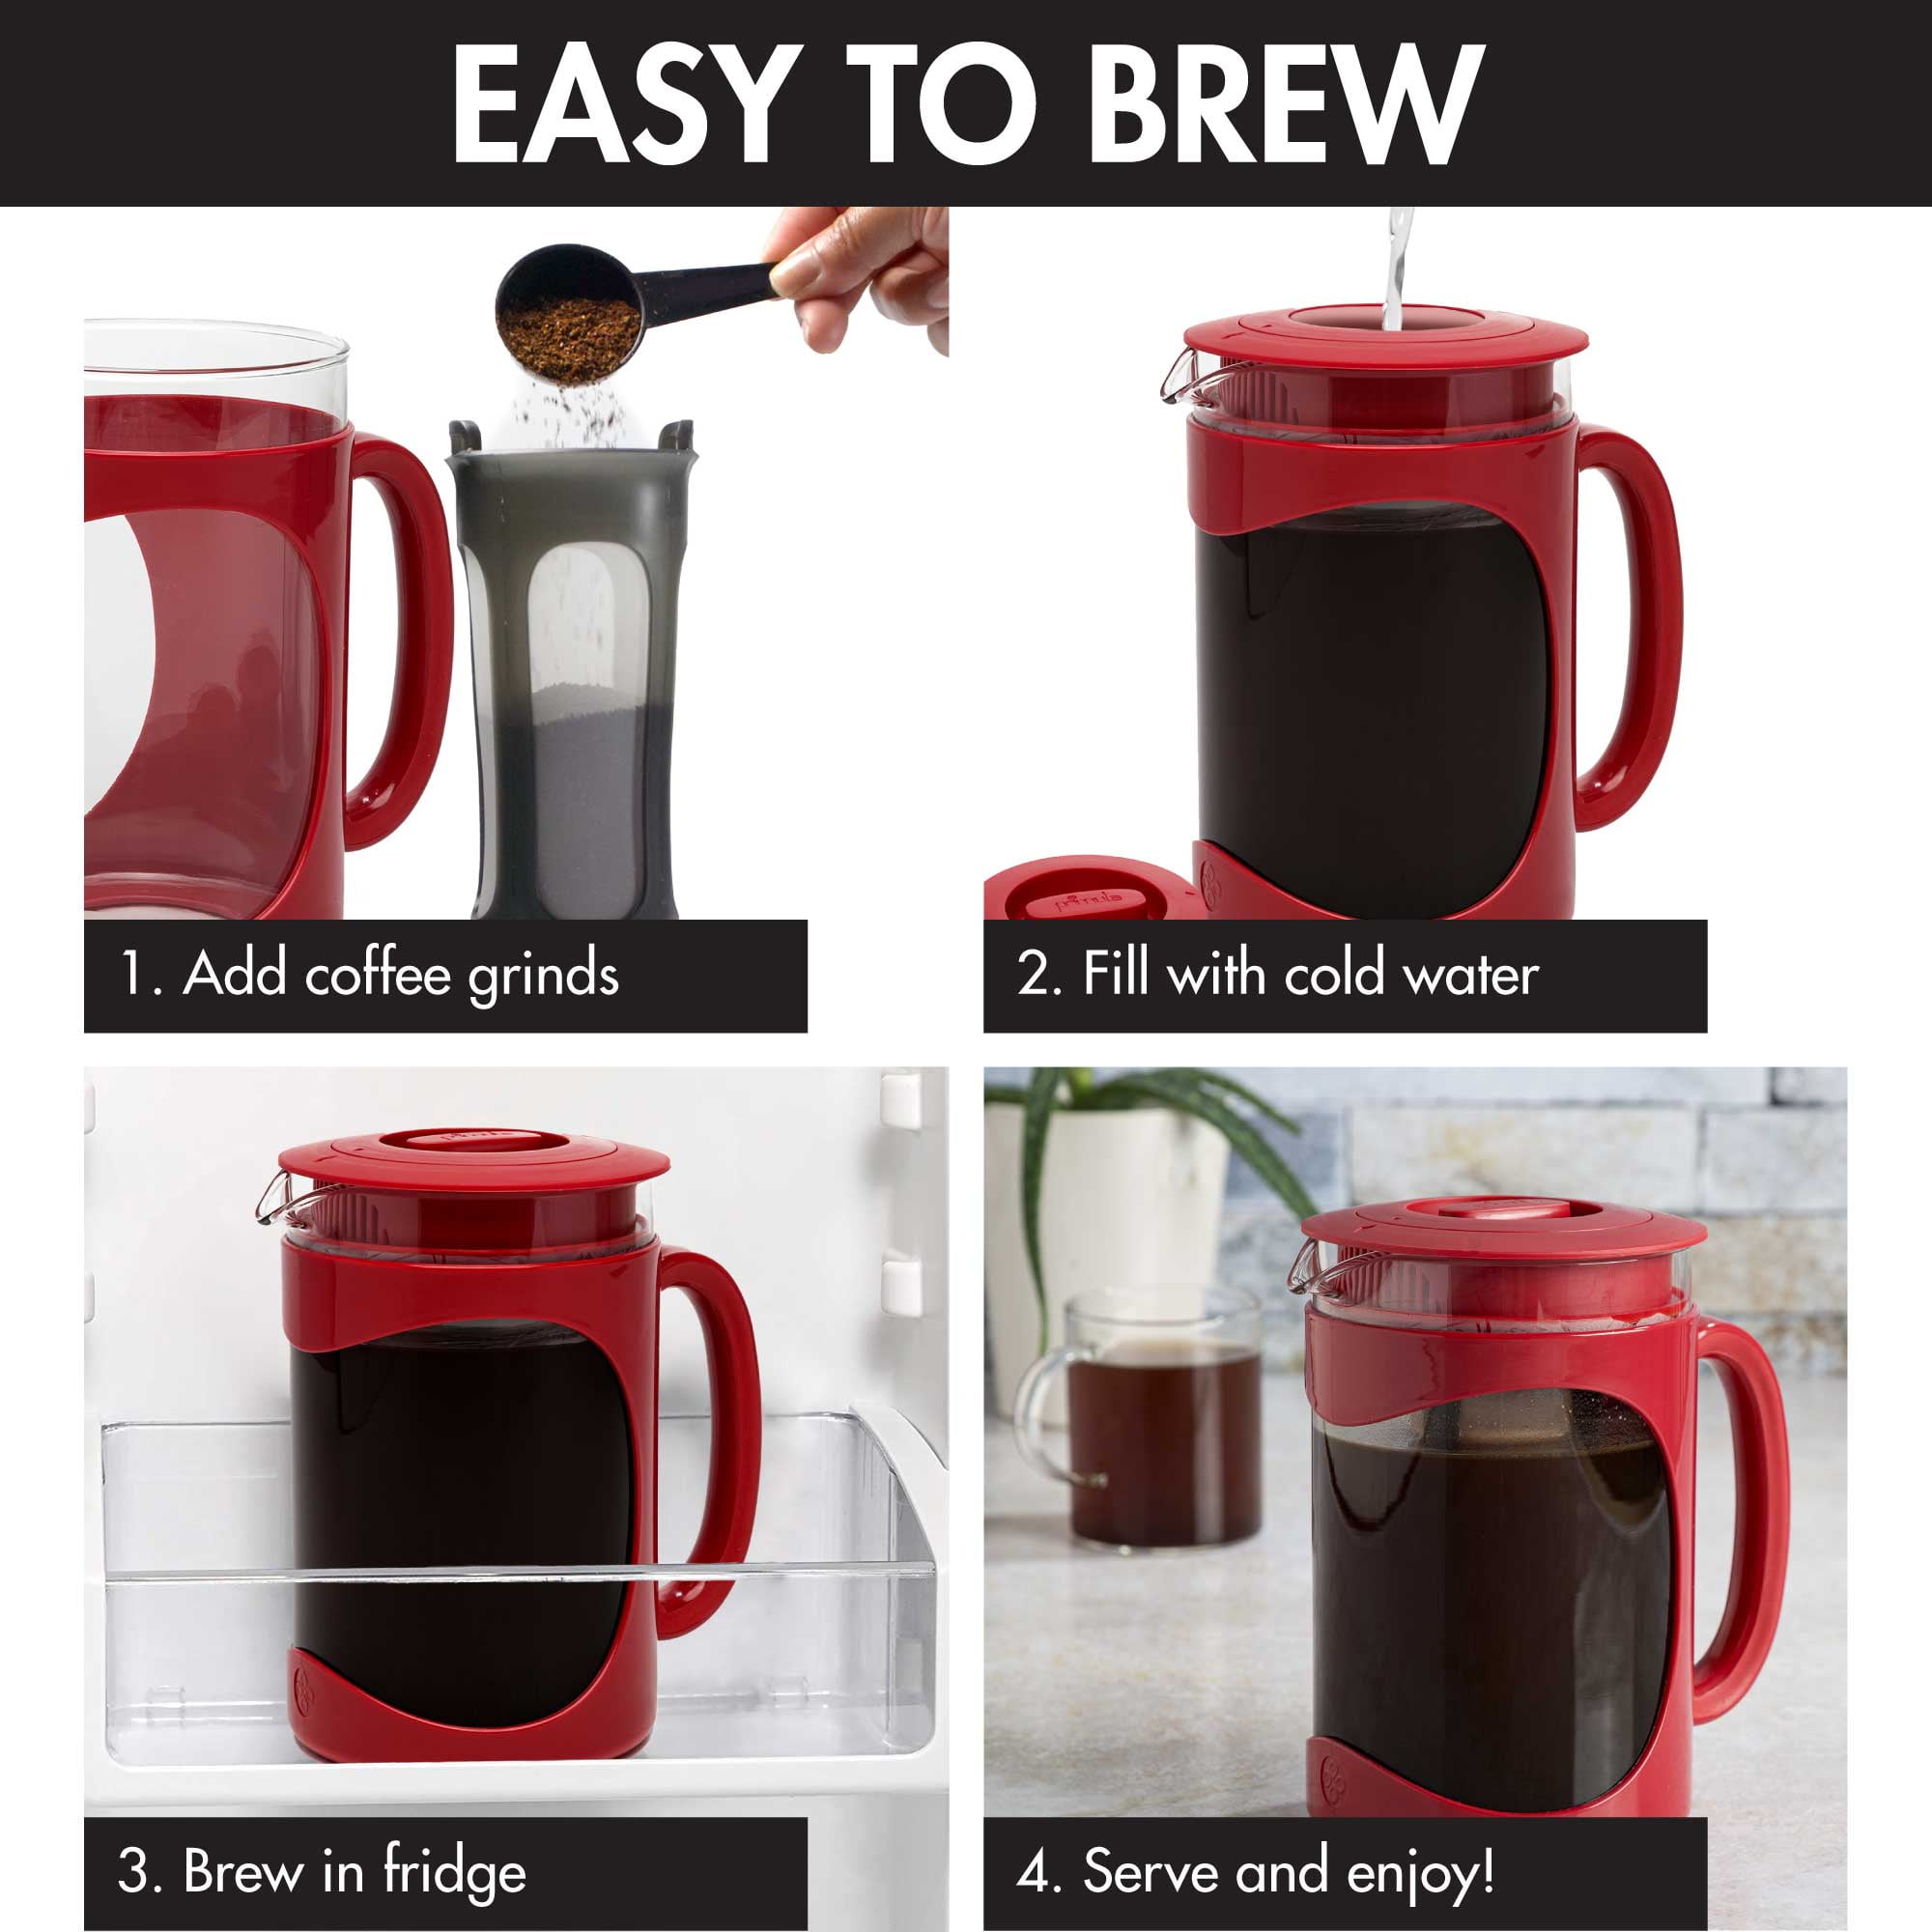 Elevate Your Coffee Experience with Primula's Cold Brew Coffee Makers